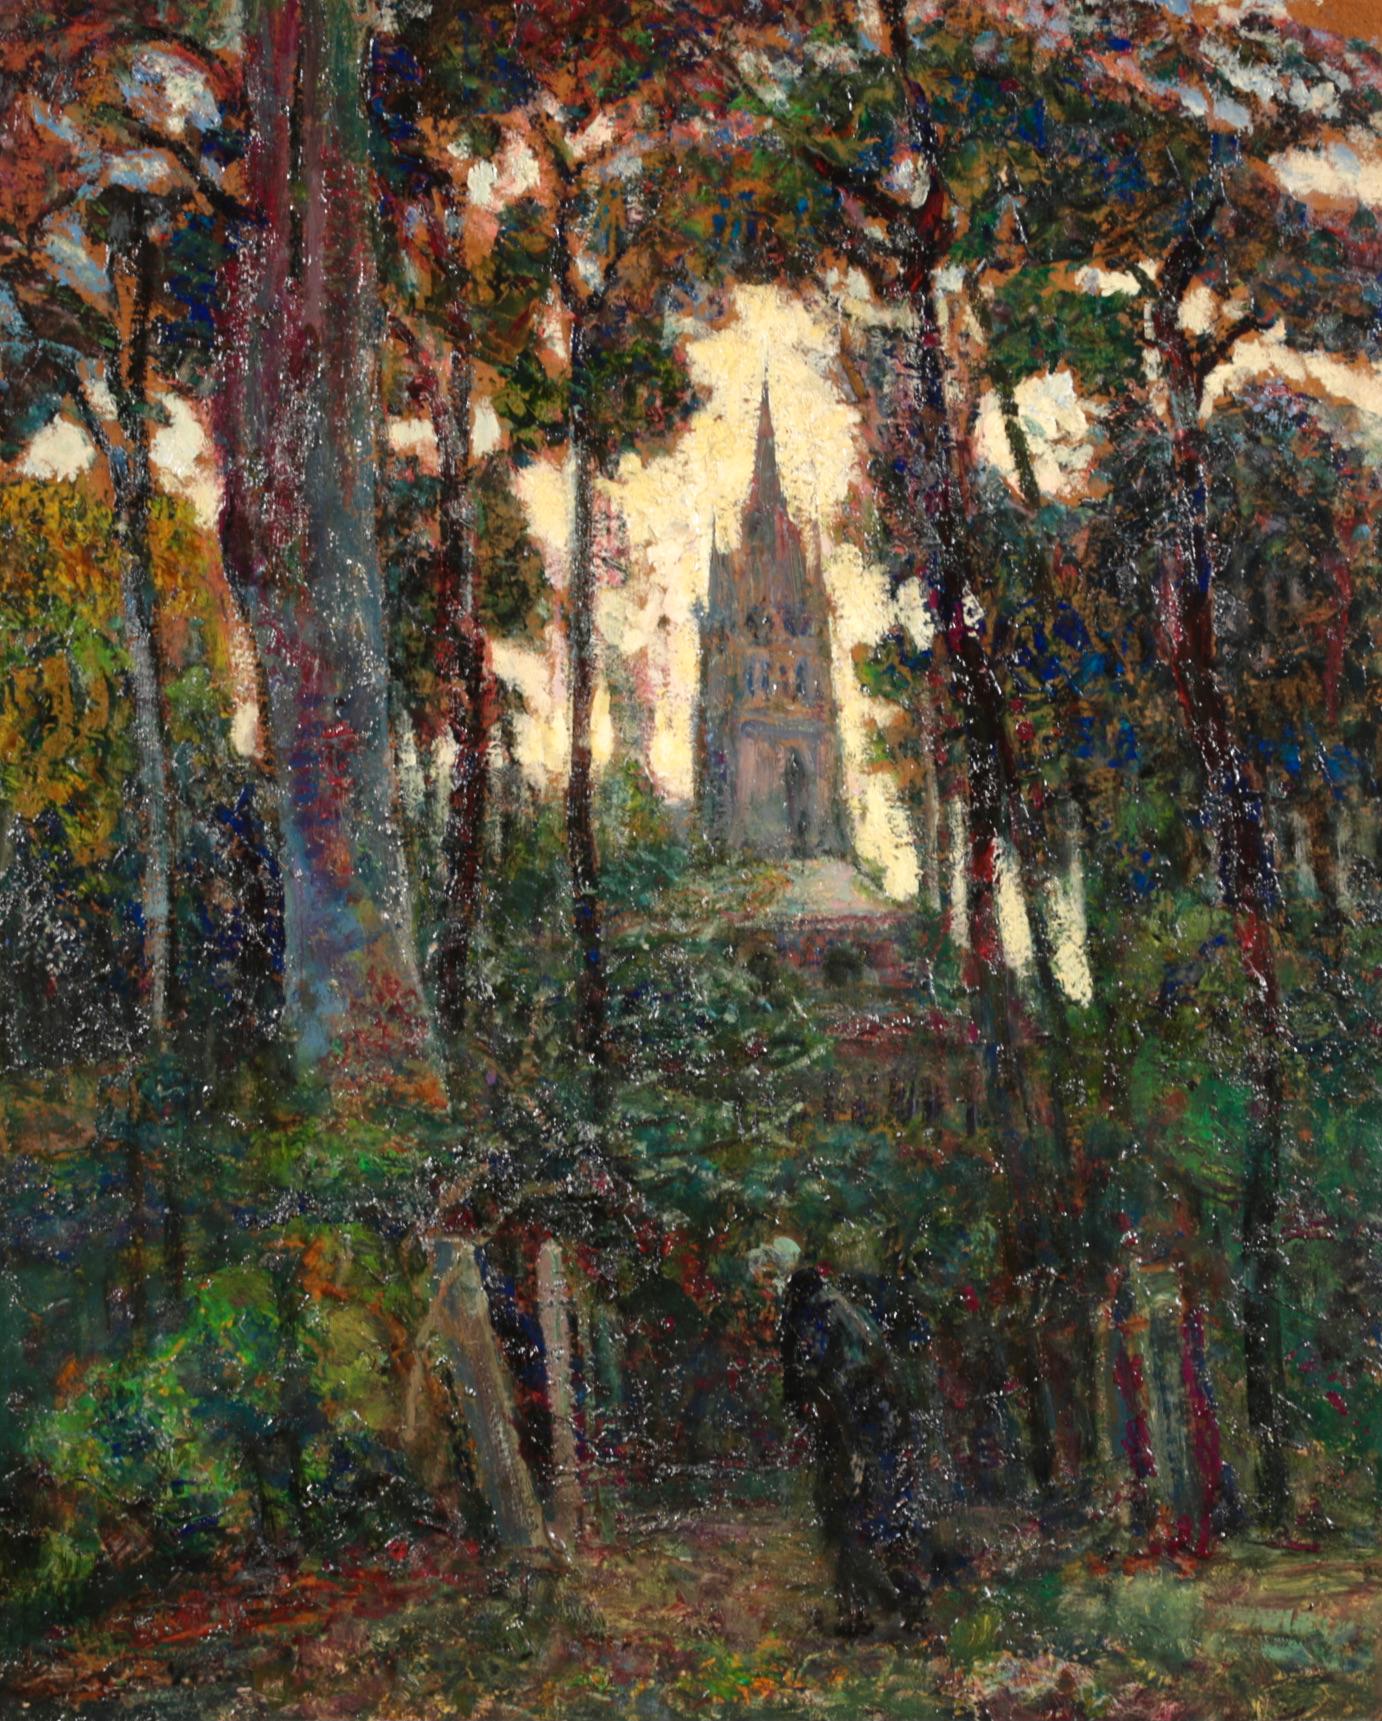 Signed figure in landscape oil on board circa 1920 by sought after French Post-Impressionist painter Victor Charreton. The piece depicts a lone figure walking through a wooded area in autumn time. The spire of a church can be seen through a gap in